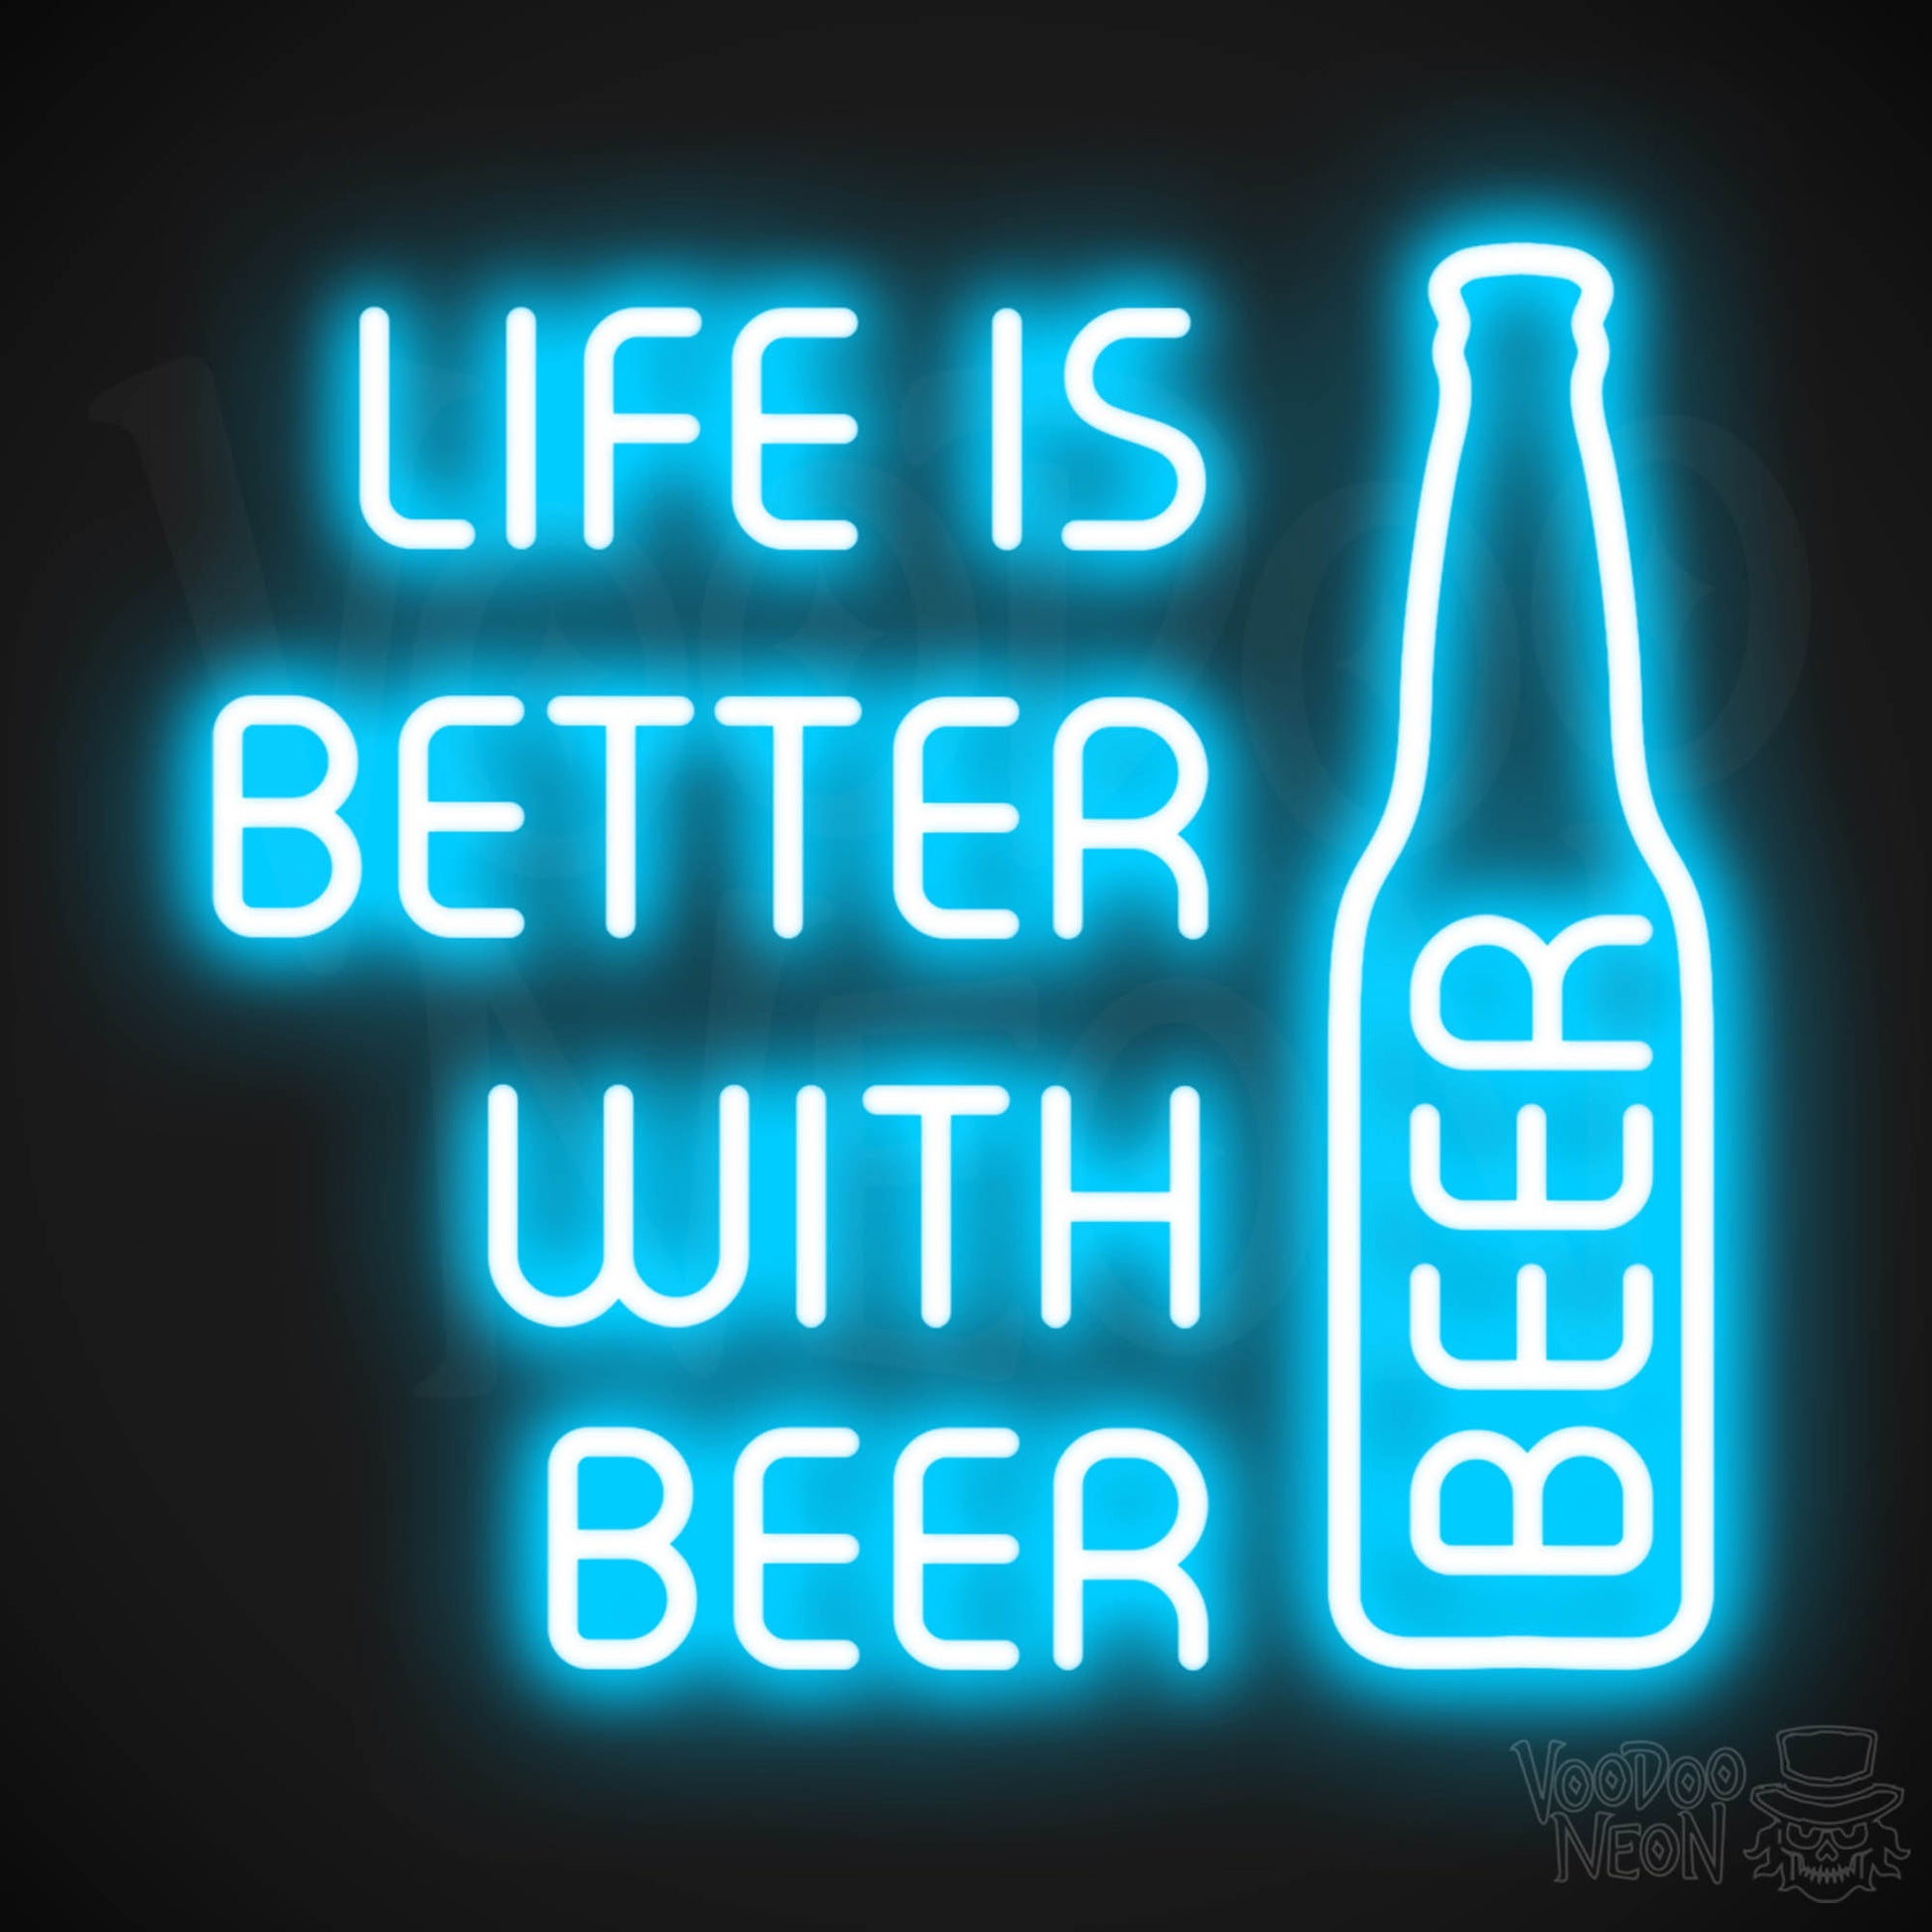 Life Is Better With Beer LED Neon - Dark Blue